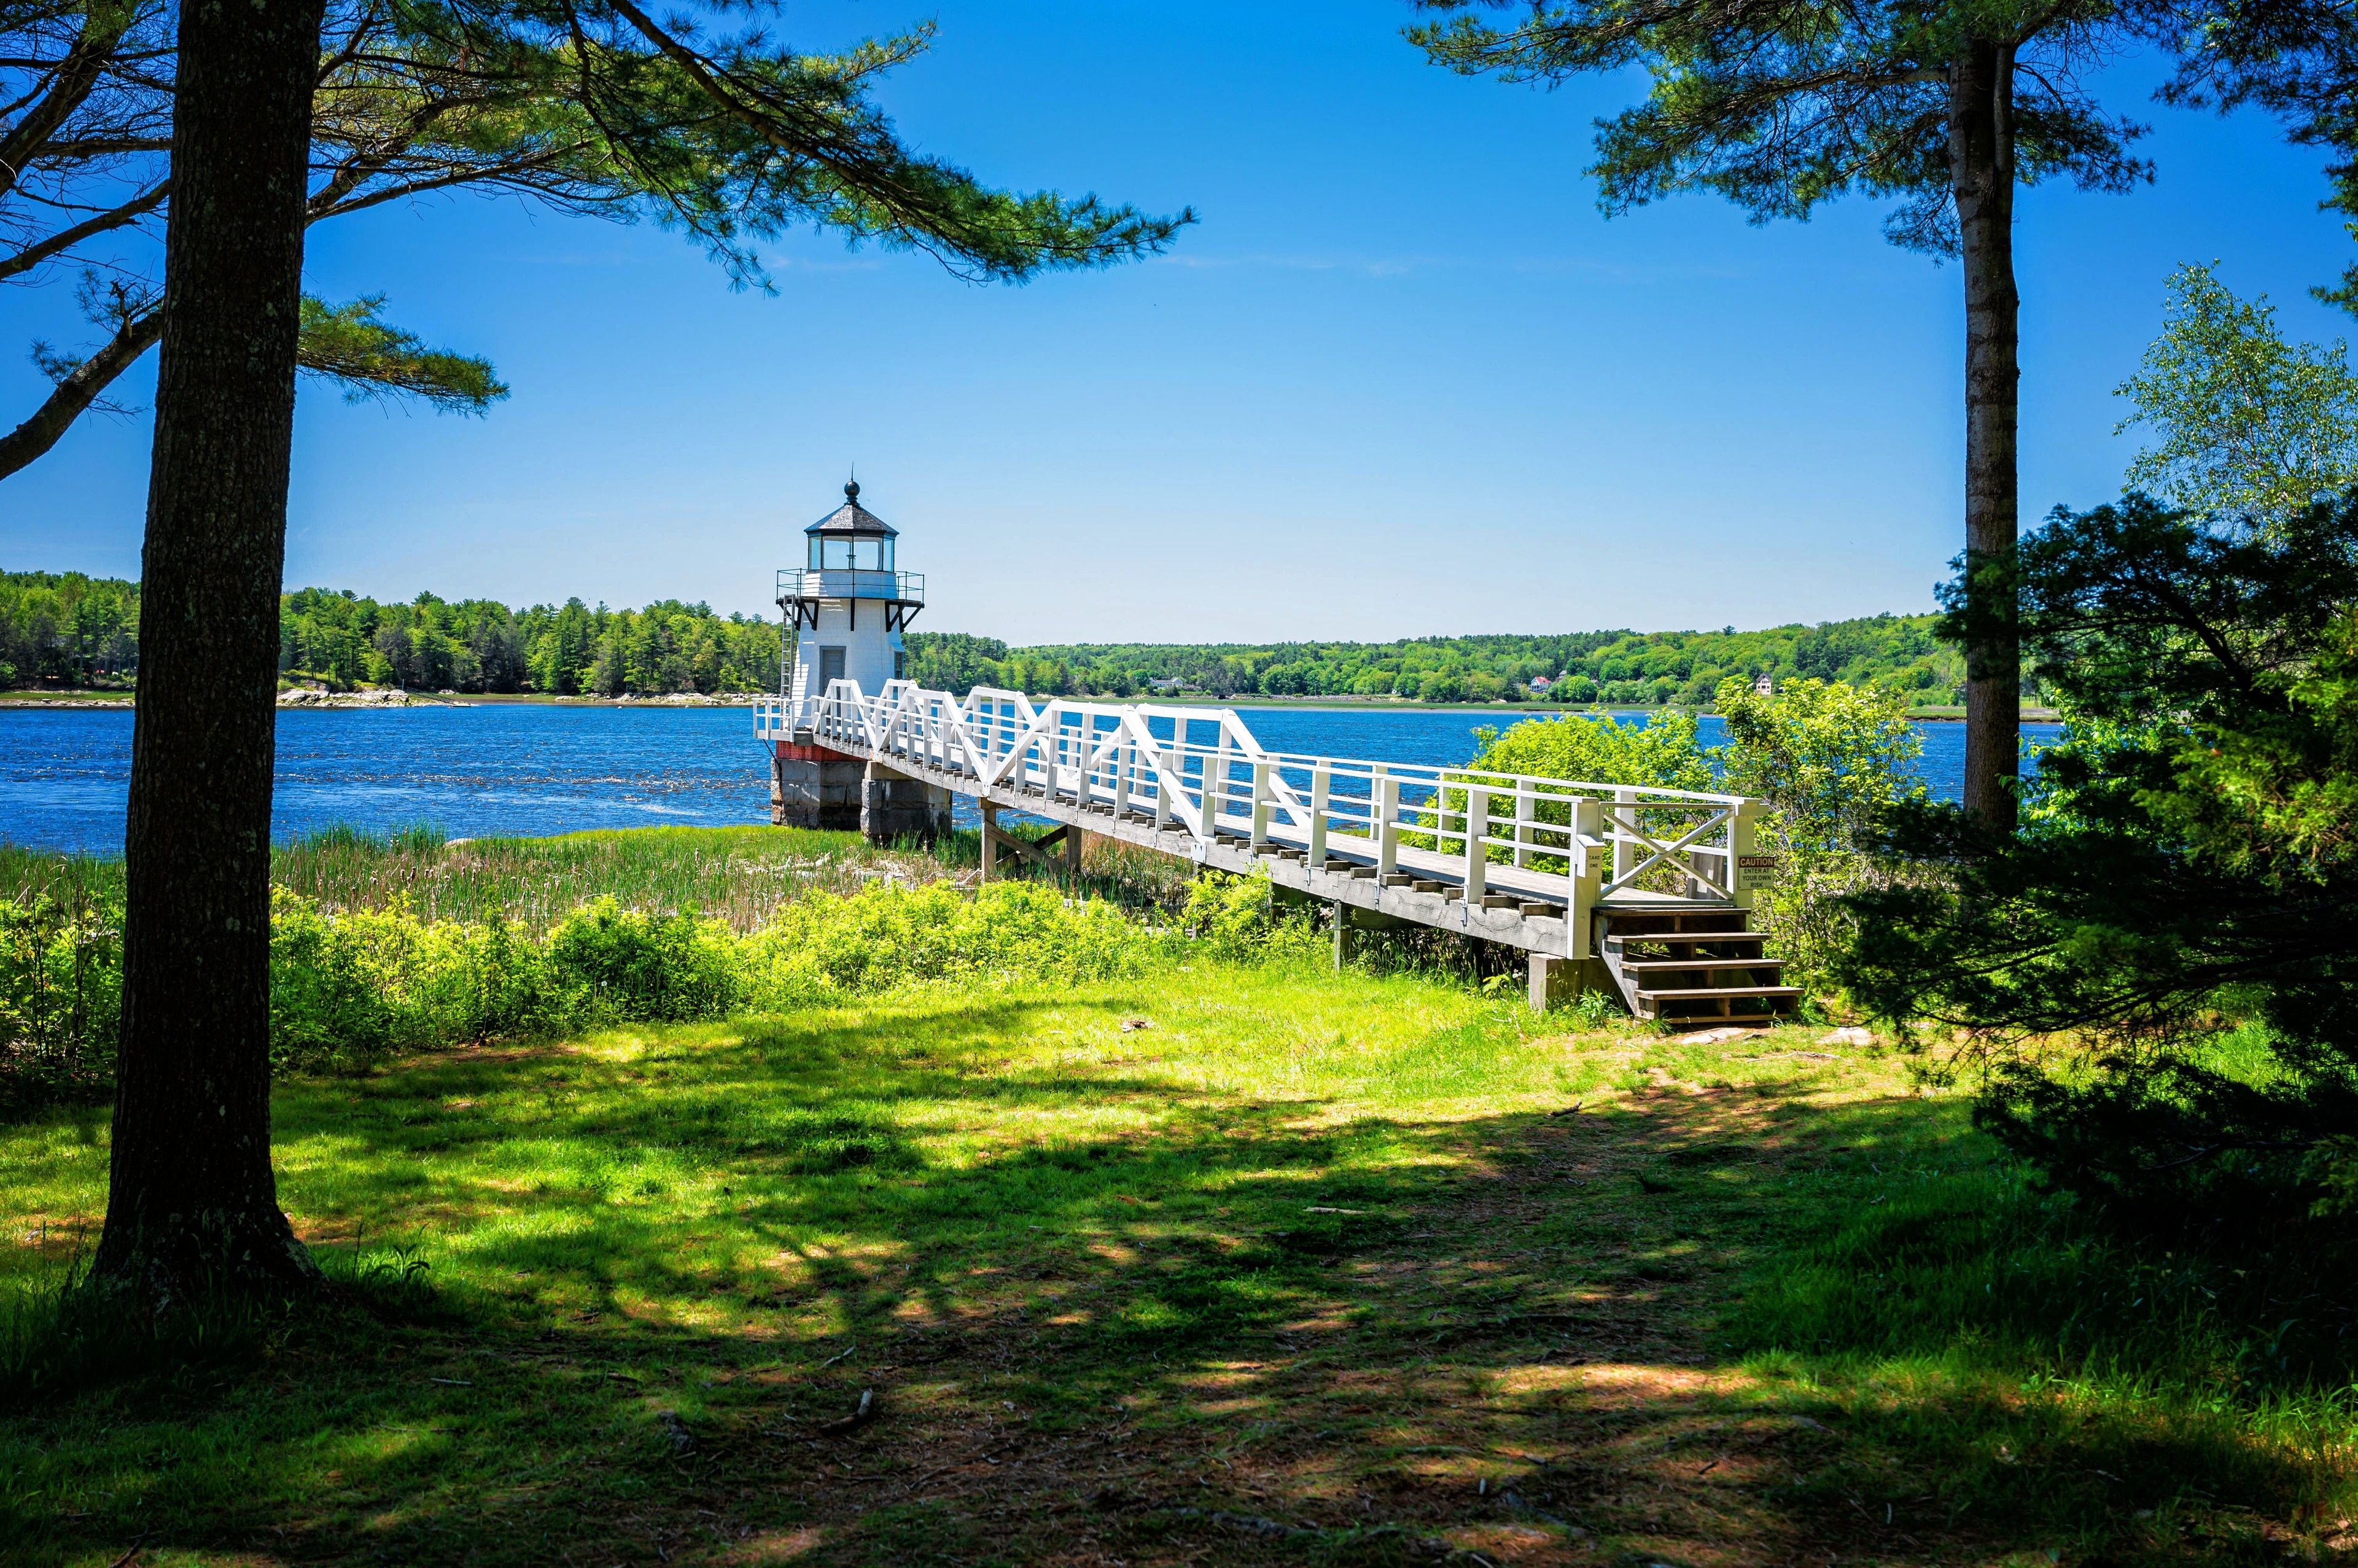 Doubling Point Light was built in 1898 on Arrowsic Island on the Kennebec River in Maine. It was one of the four lighthouses built that year to provide navigational aid for ships on their way to Bath, "the City of Ships"
#lighthouse #maine